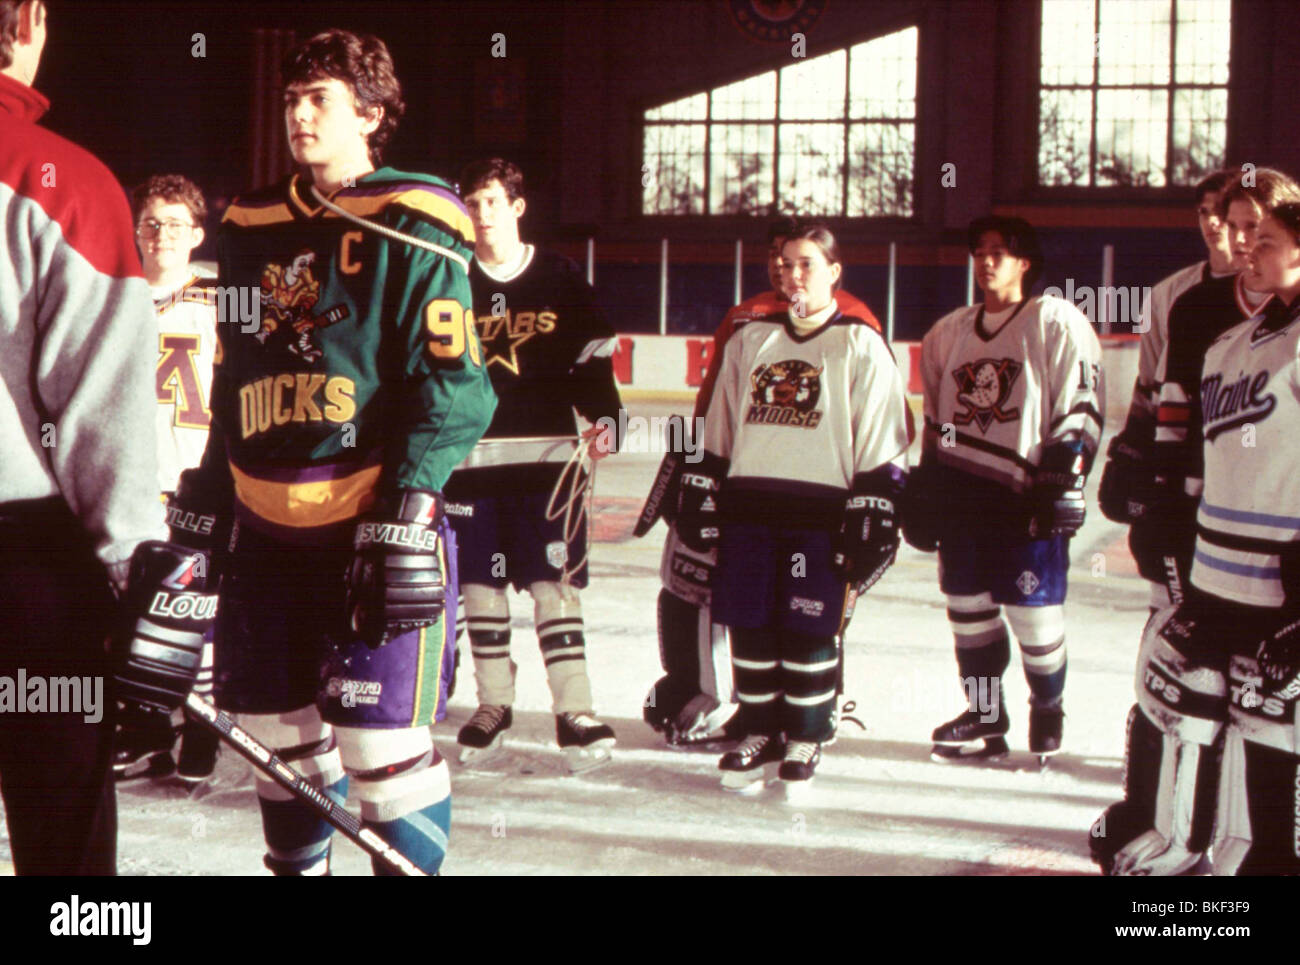 THE MIGHTY DUCKS II (1994) D2: THE MIGHTY DUCKS (ALT) THE MIGHTY